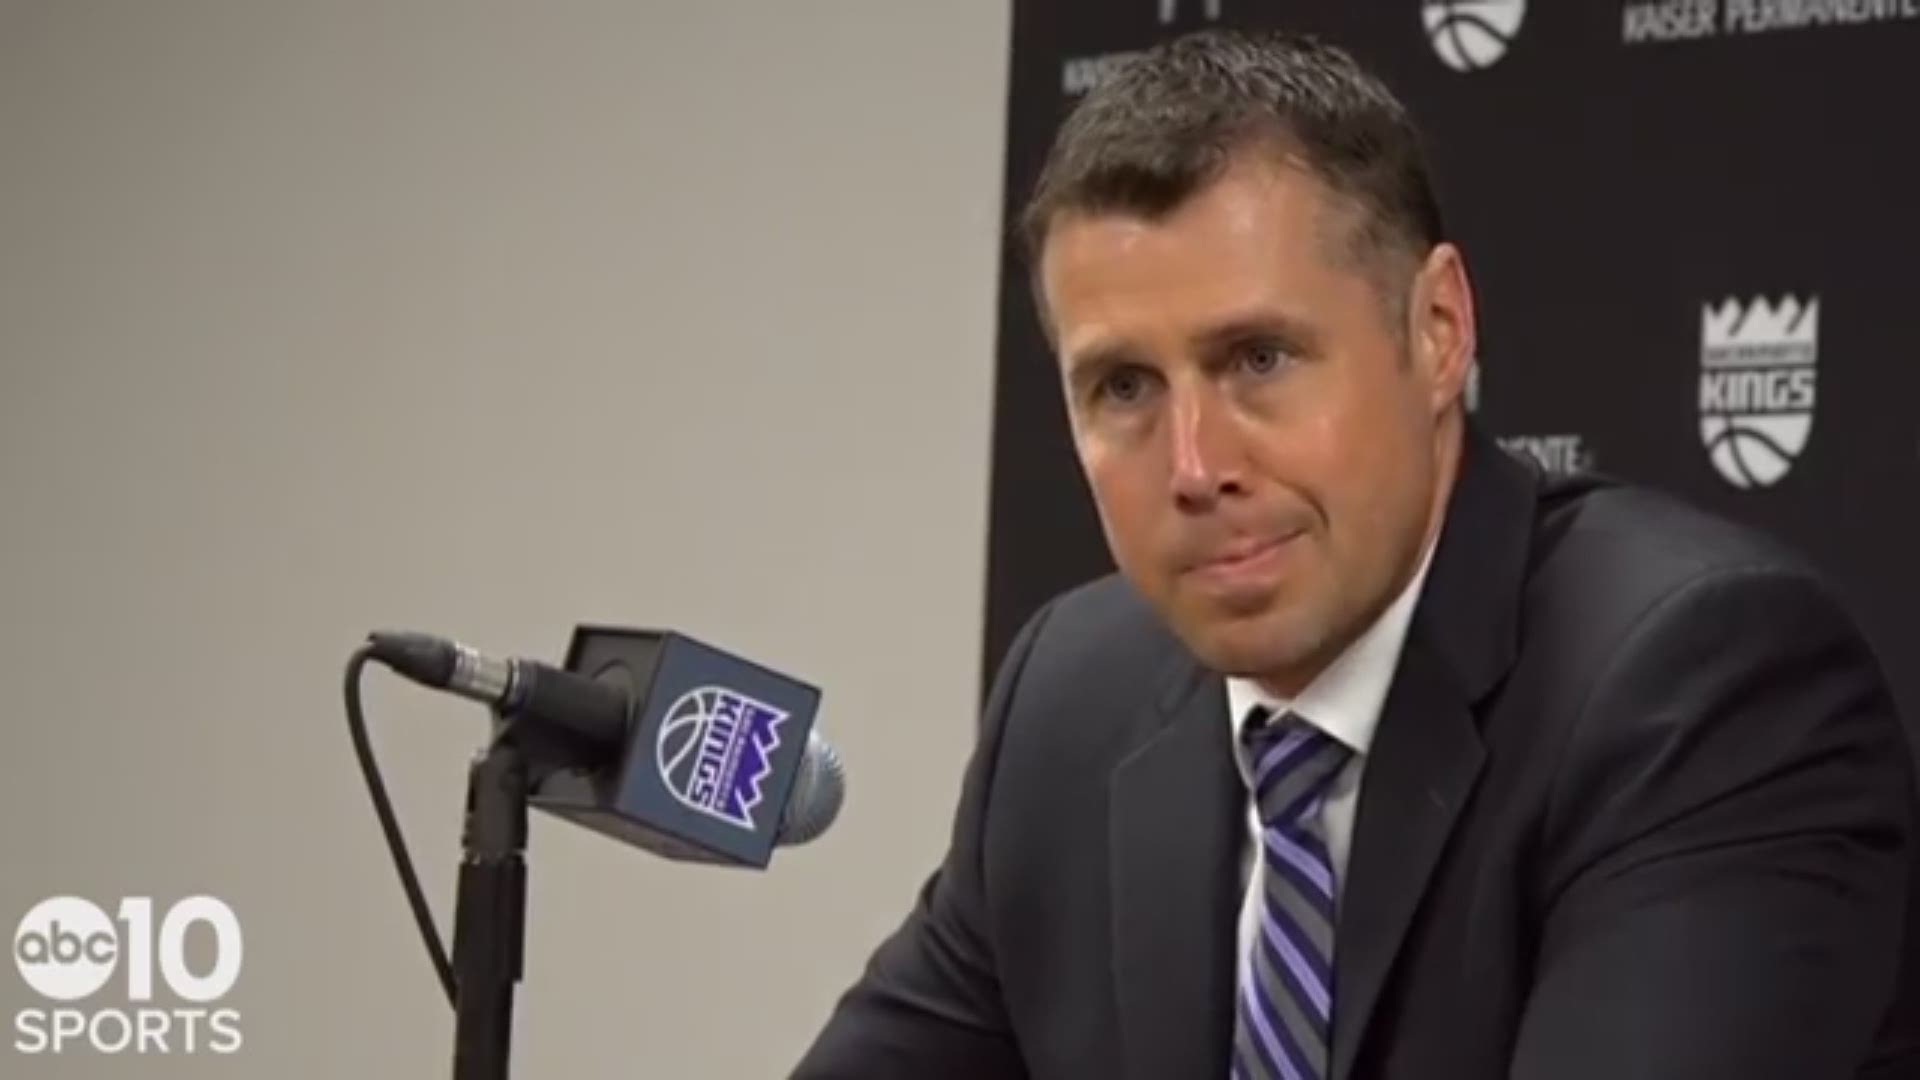 Kings head coach Dave Joerger discusses his team's fourth quarter meltdown, allowing D'Angelo Russell and his Brooklyn Nets to rally from 28 points in the fourth quarter to beat Sacramento 123-121 at Golden 1 Center on Tuesday night.